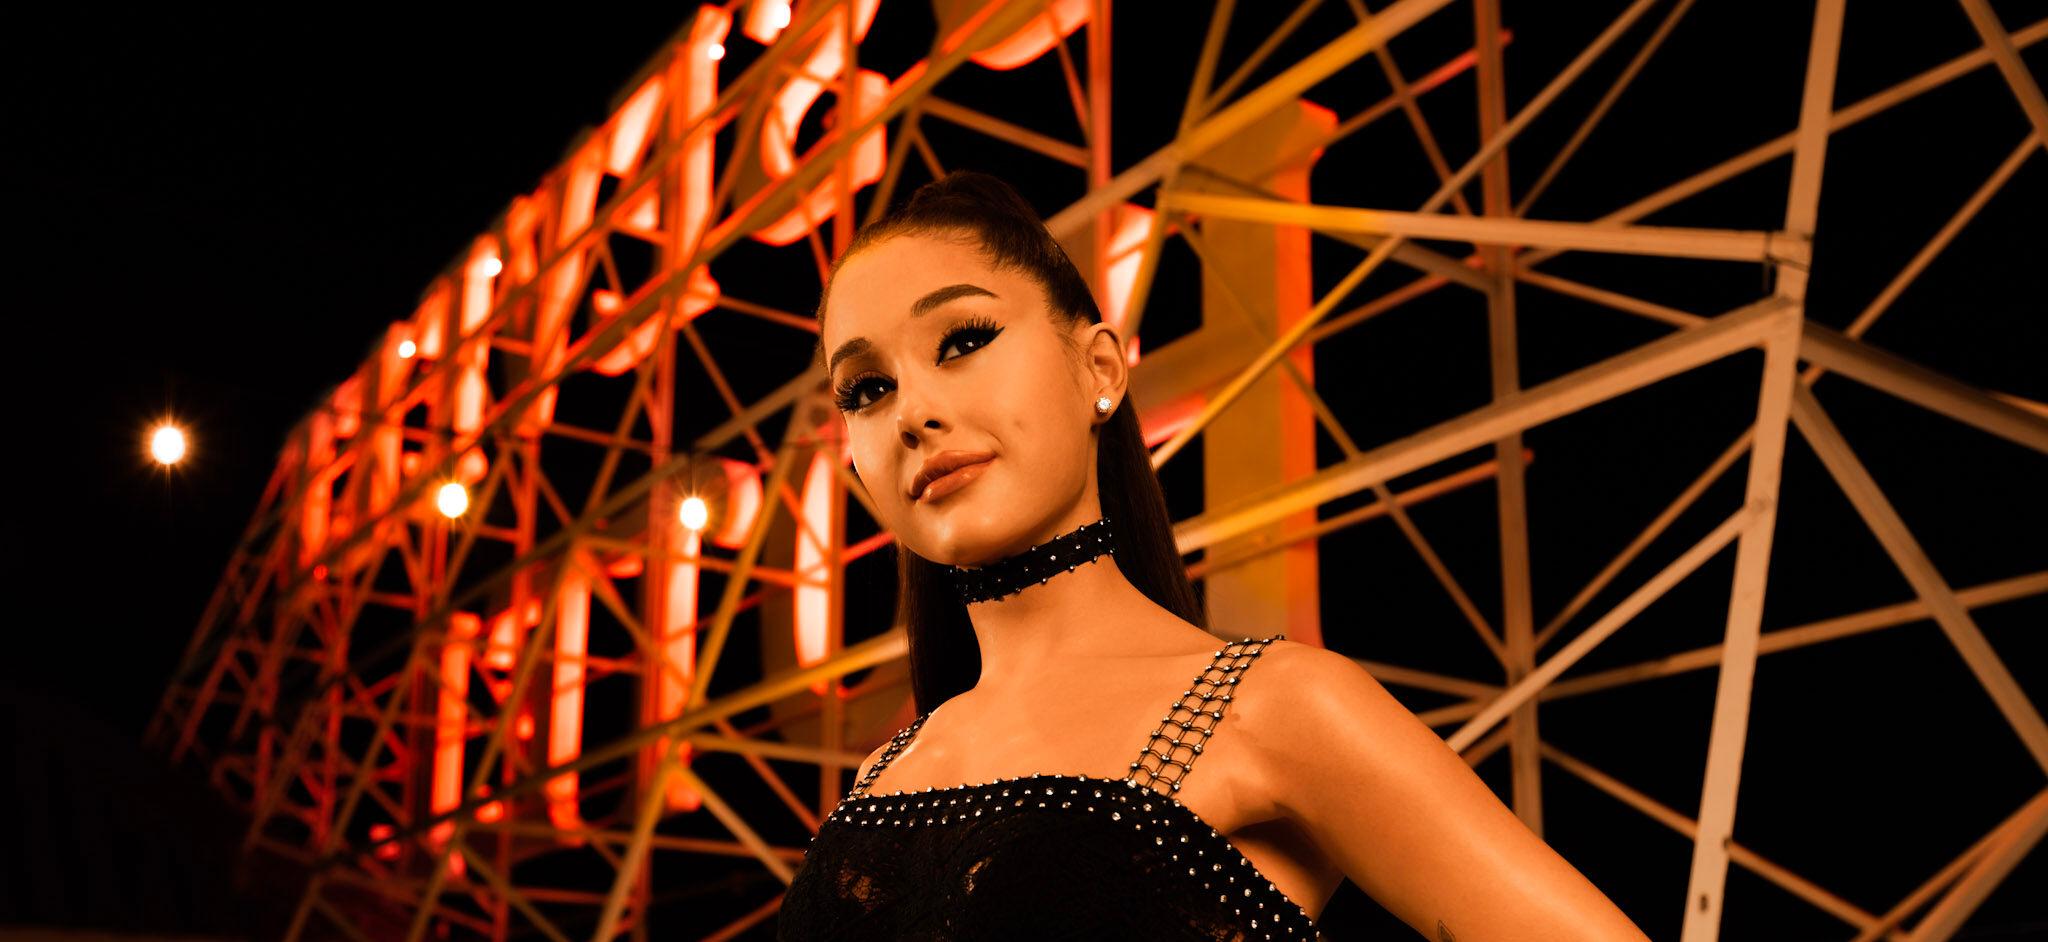 Ariana Grande Has Plans To Commemorate ‘Yours Truly’ 10th Anniversary Amid Dating Drama